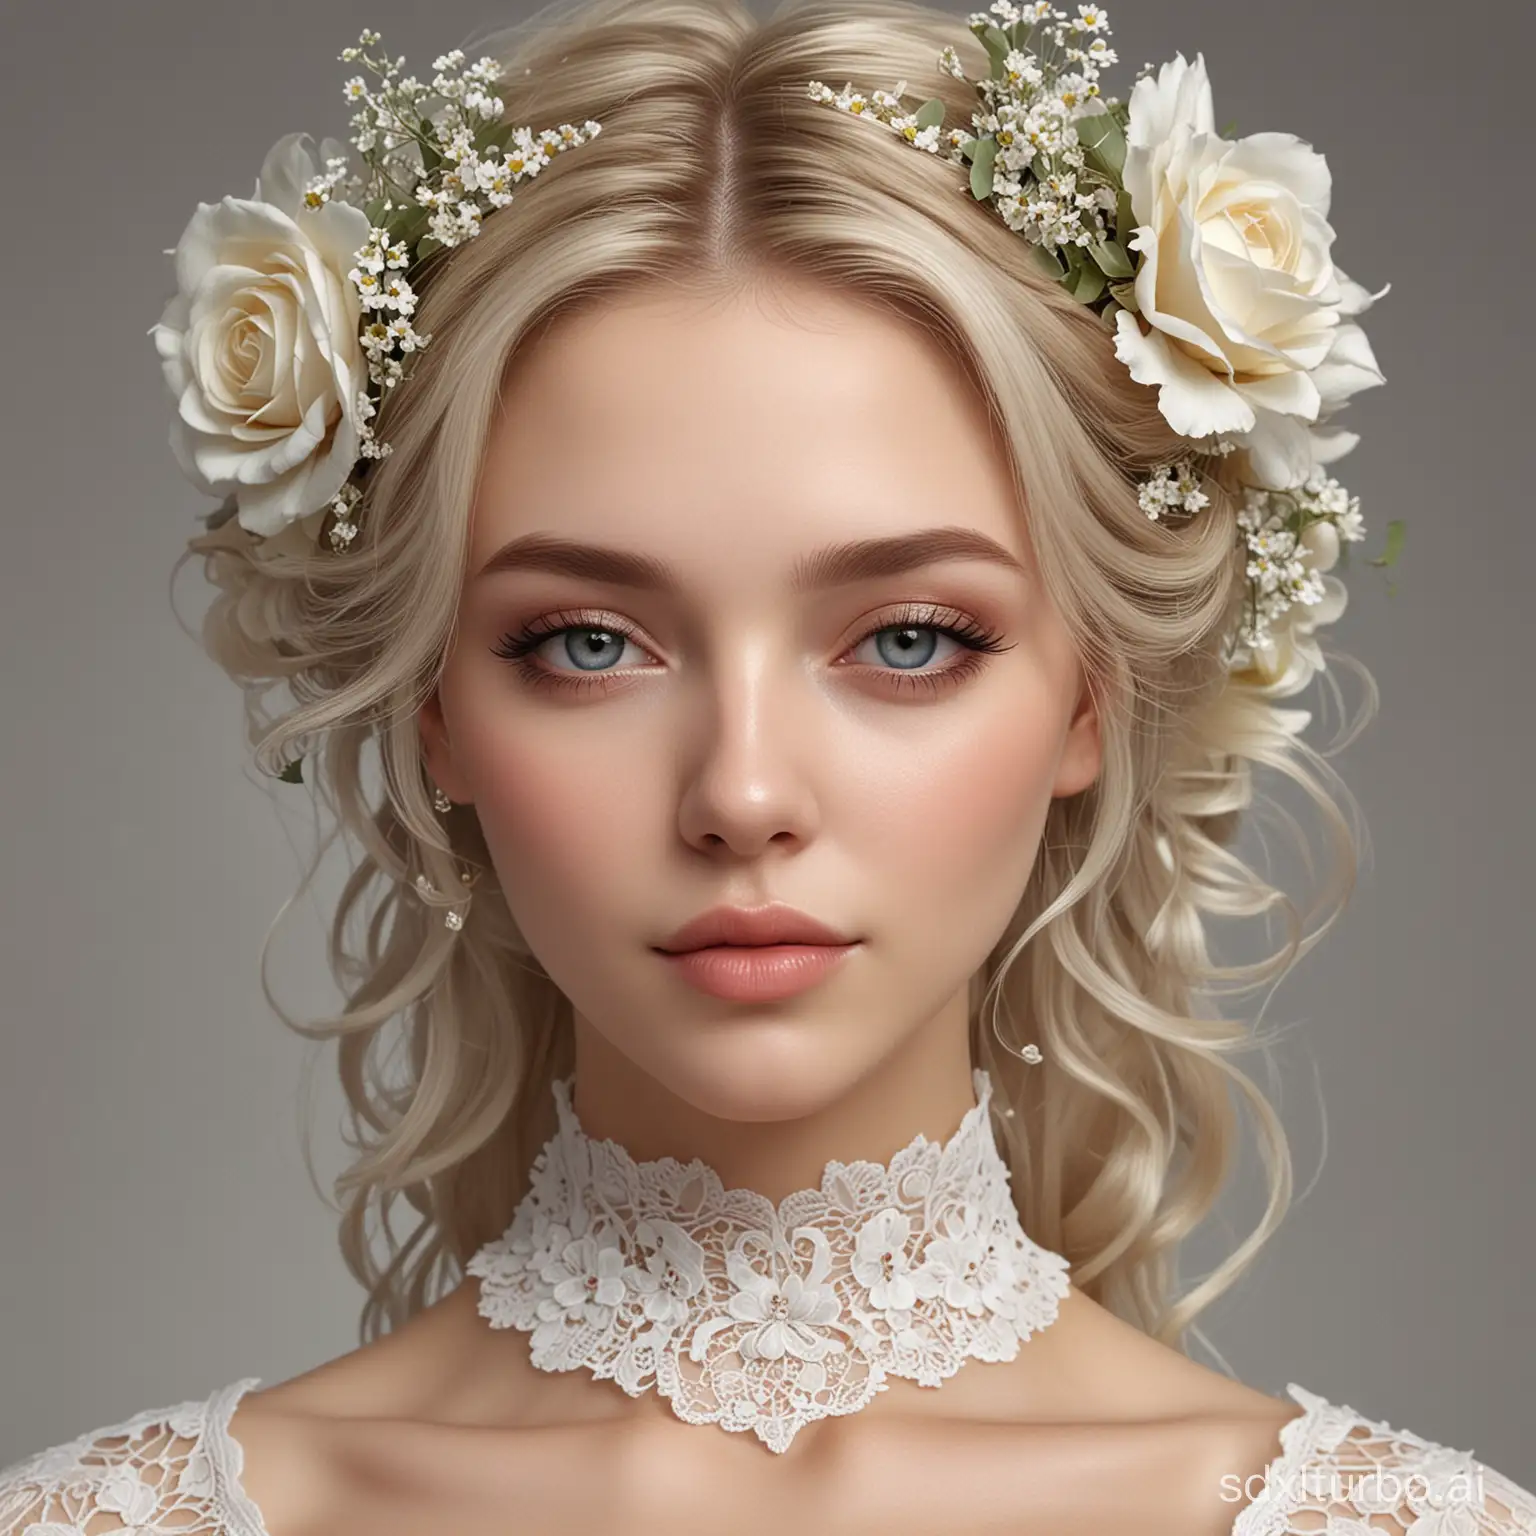 Woman-with-Floral-Hair-Adornments-in-Romantic-3D-Avatar-Portrait-by-Marie-Angel